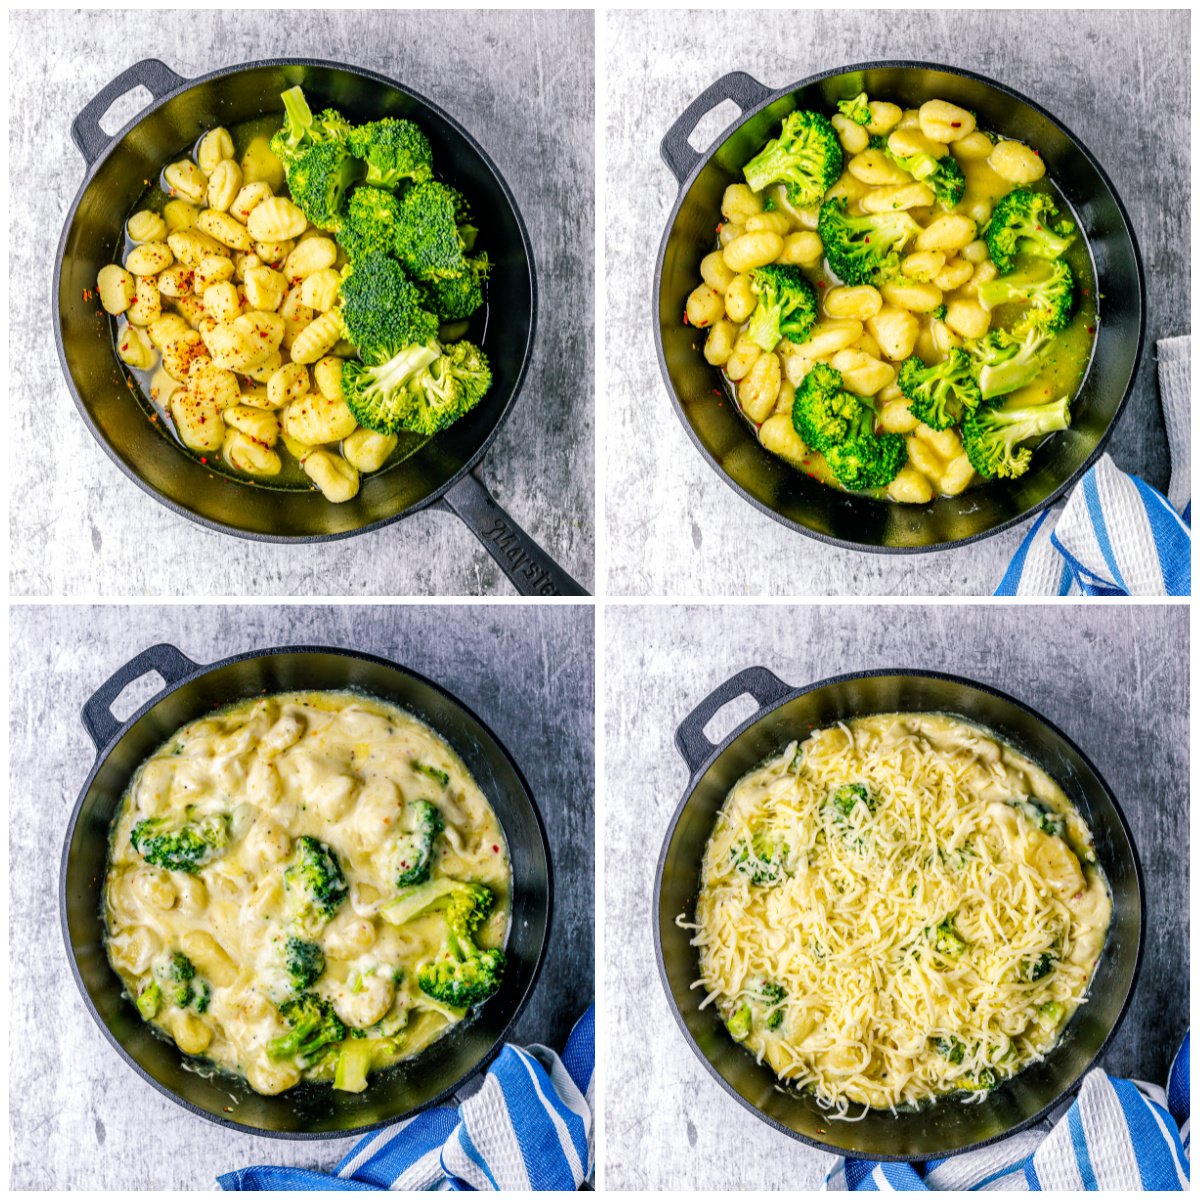 Step by step photos on how to make Broccoli Gnocchi.